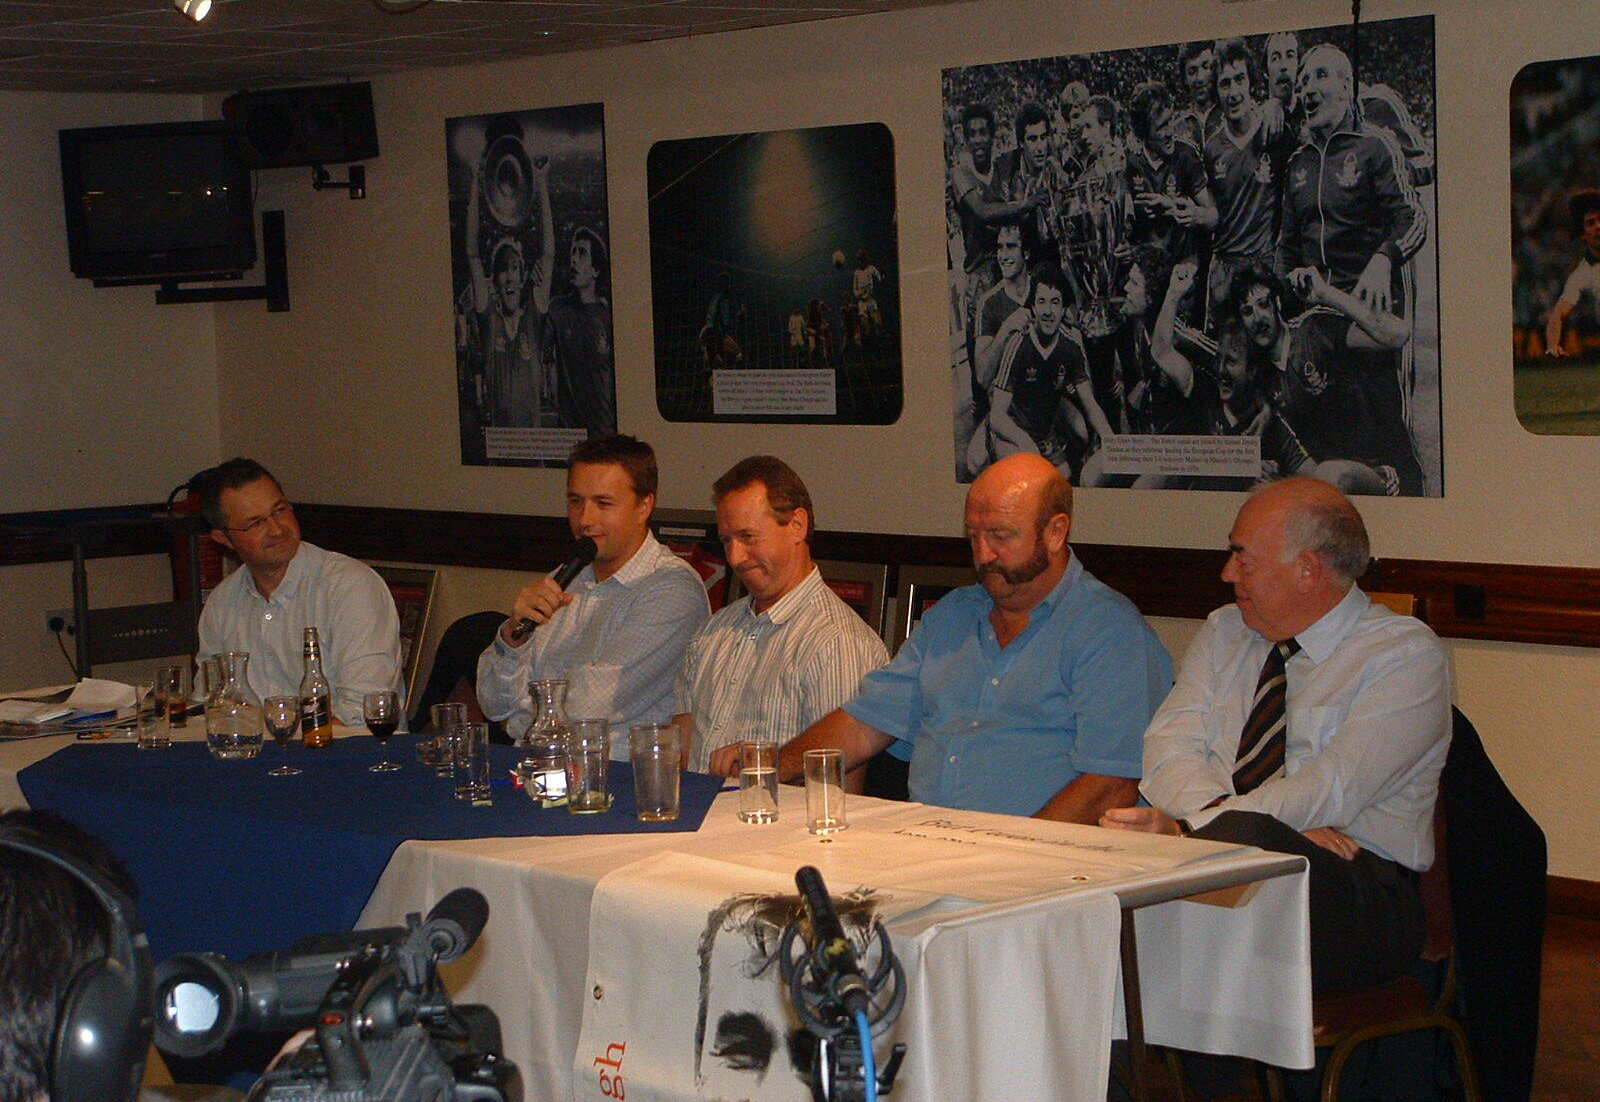 Legends Panel at the City Ground